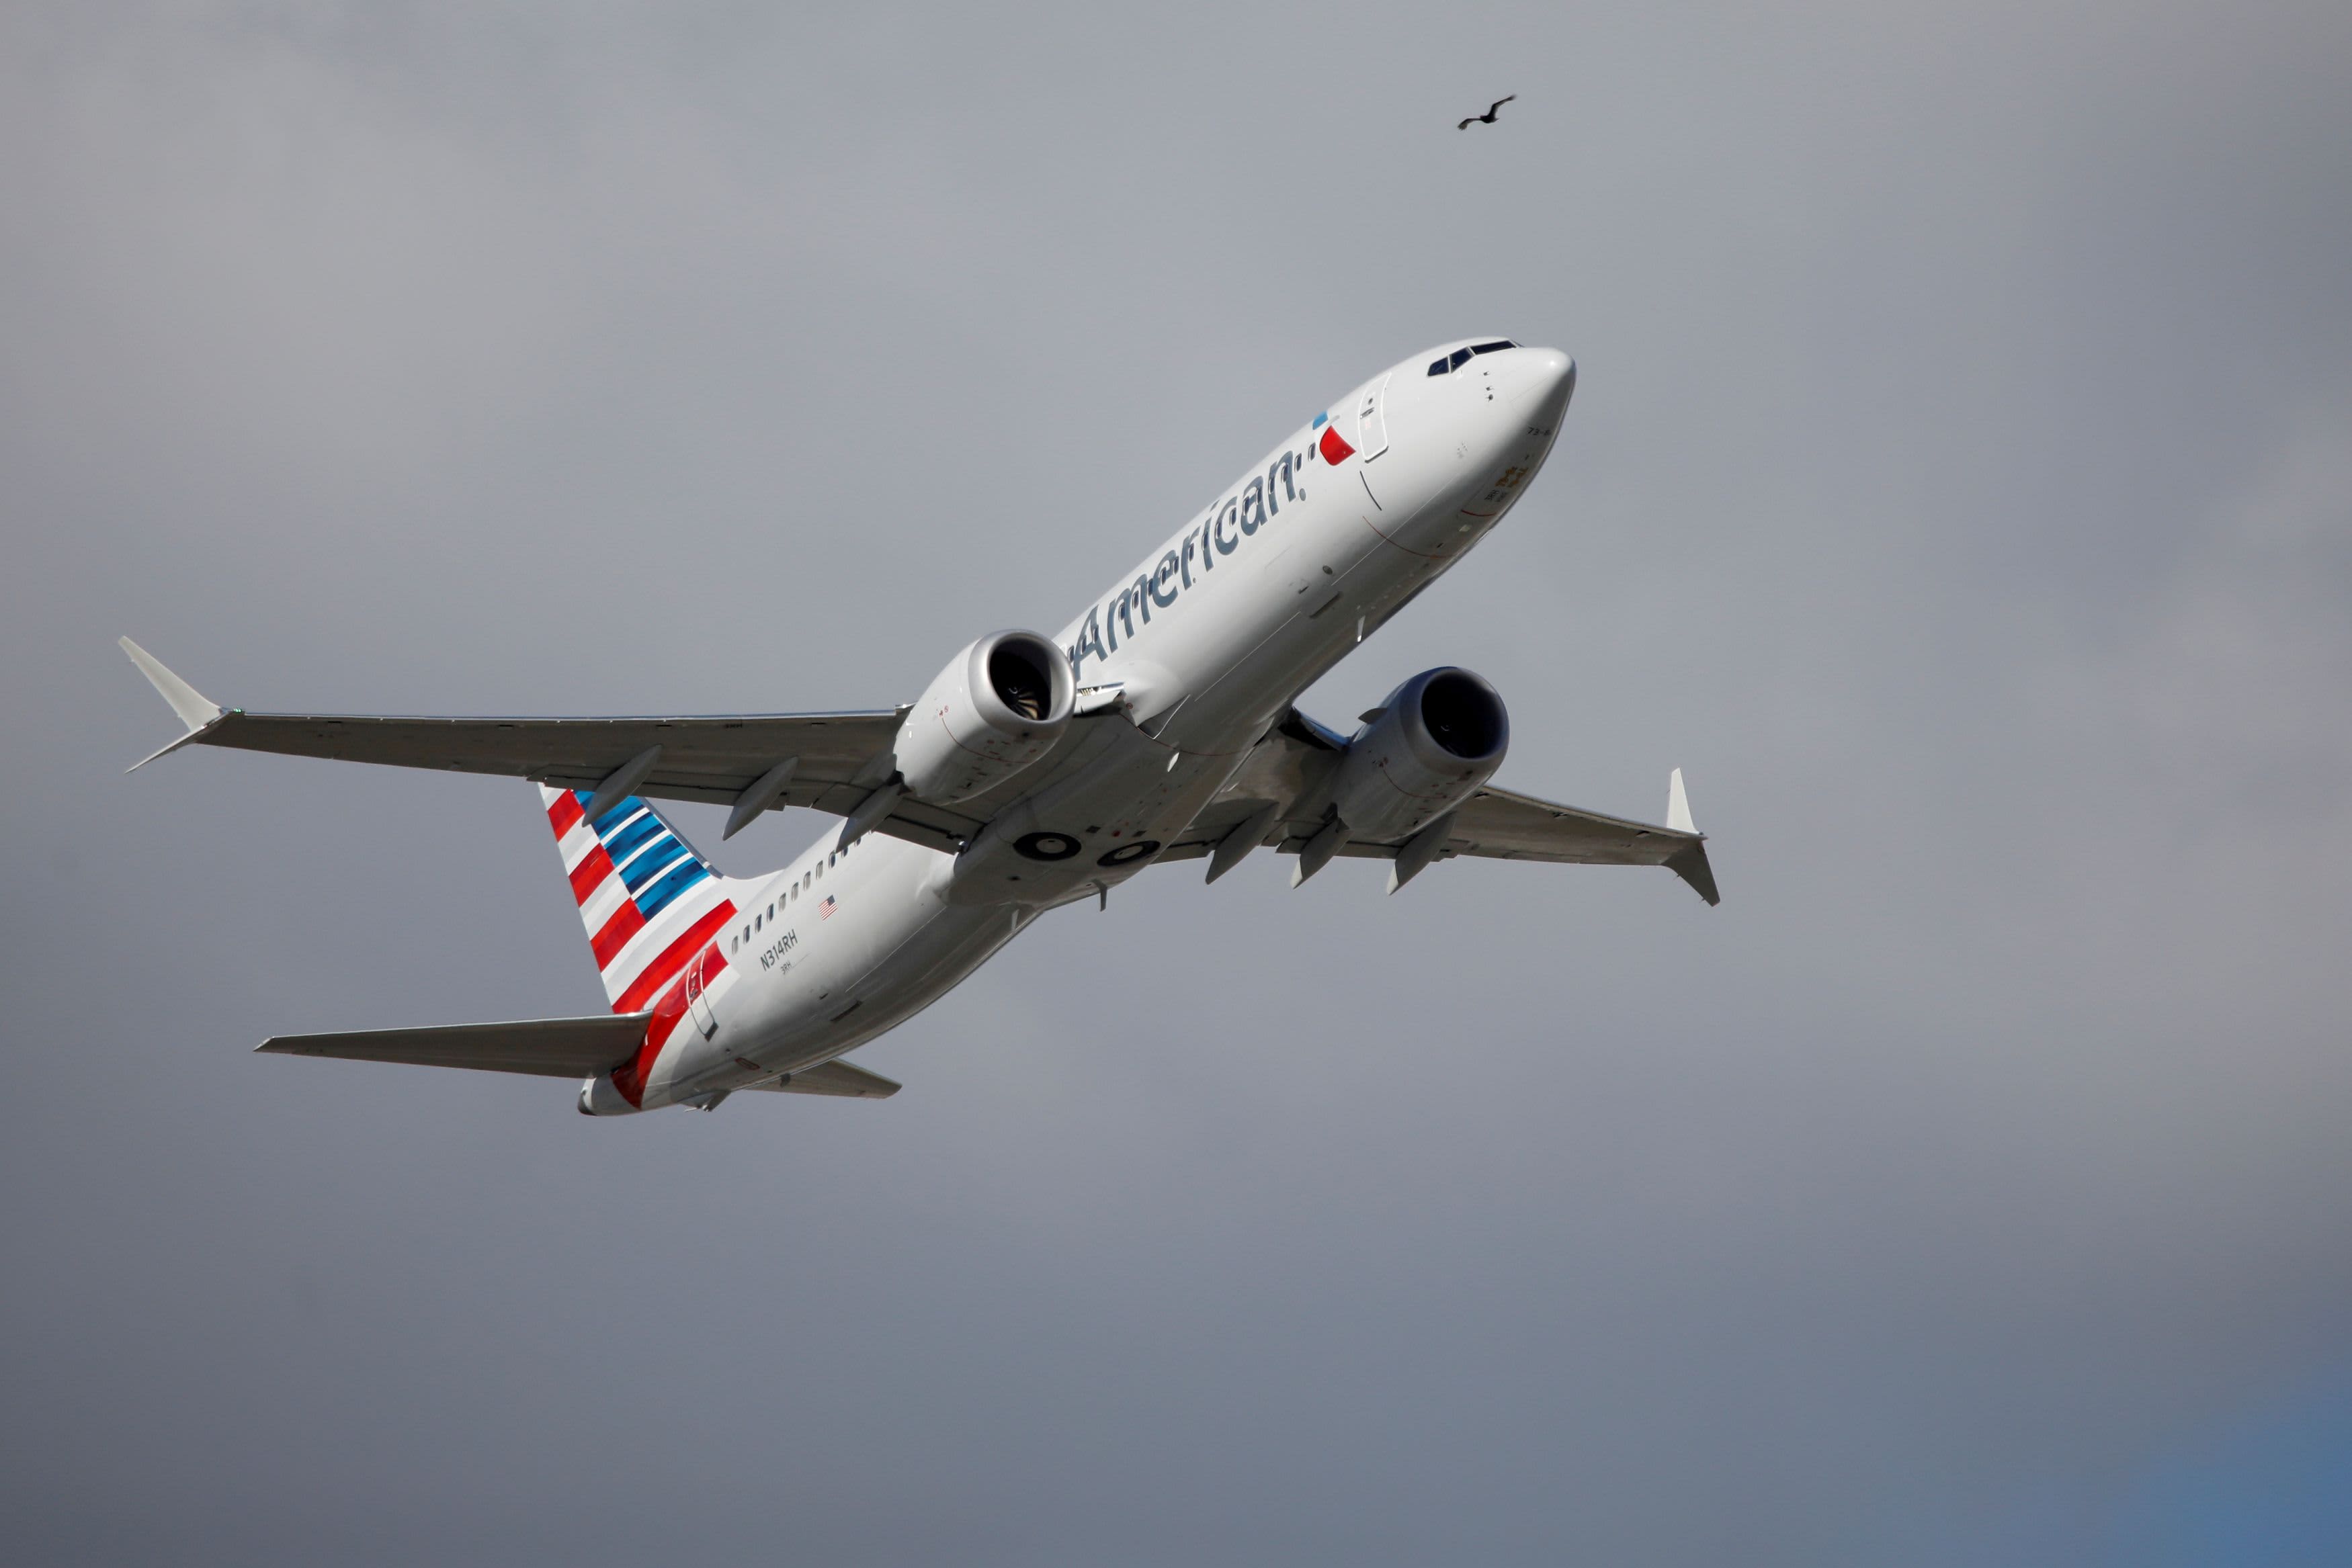 American Airlines, Teradata, Equifax and more